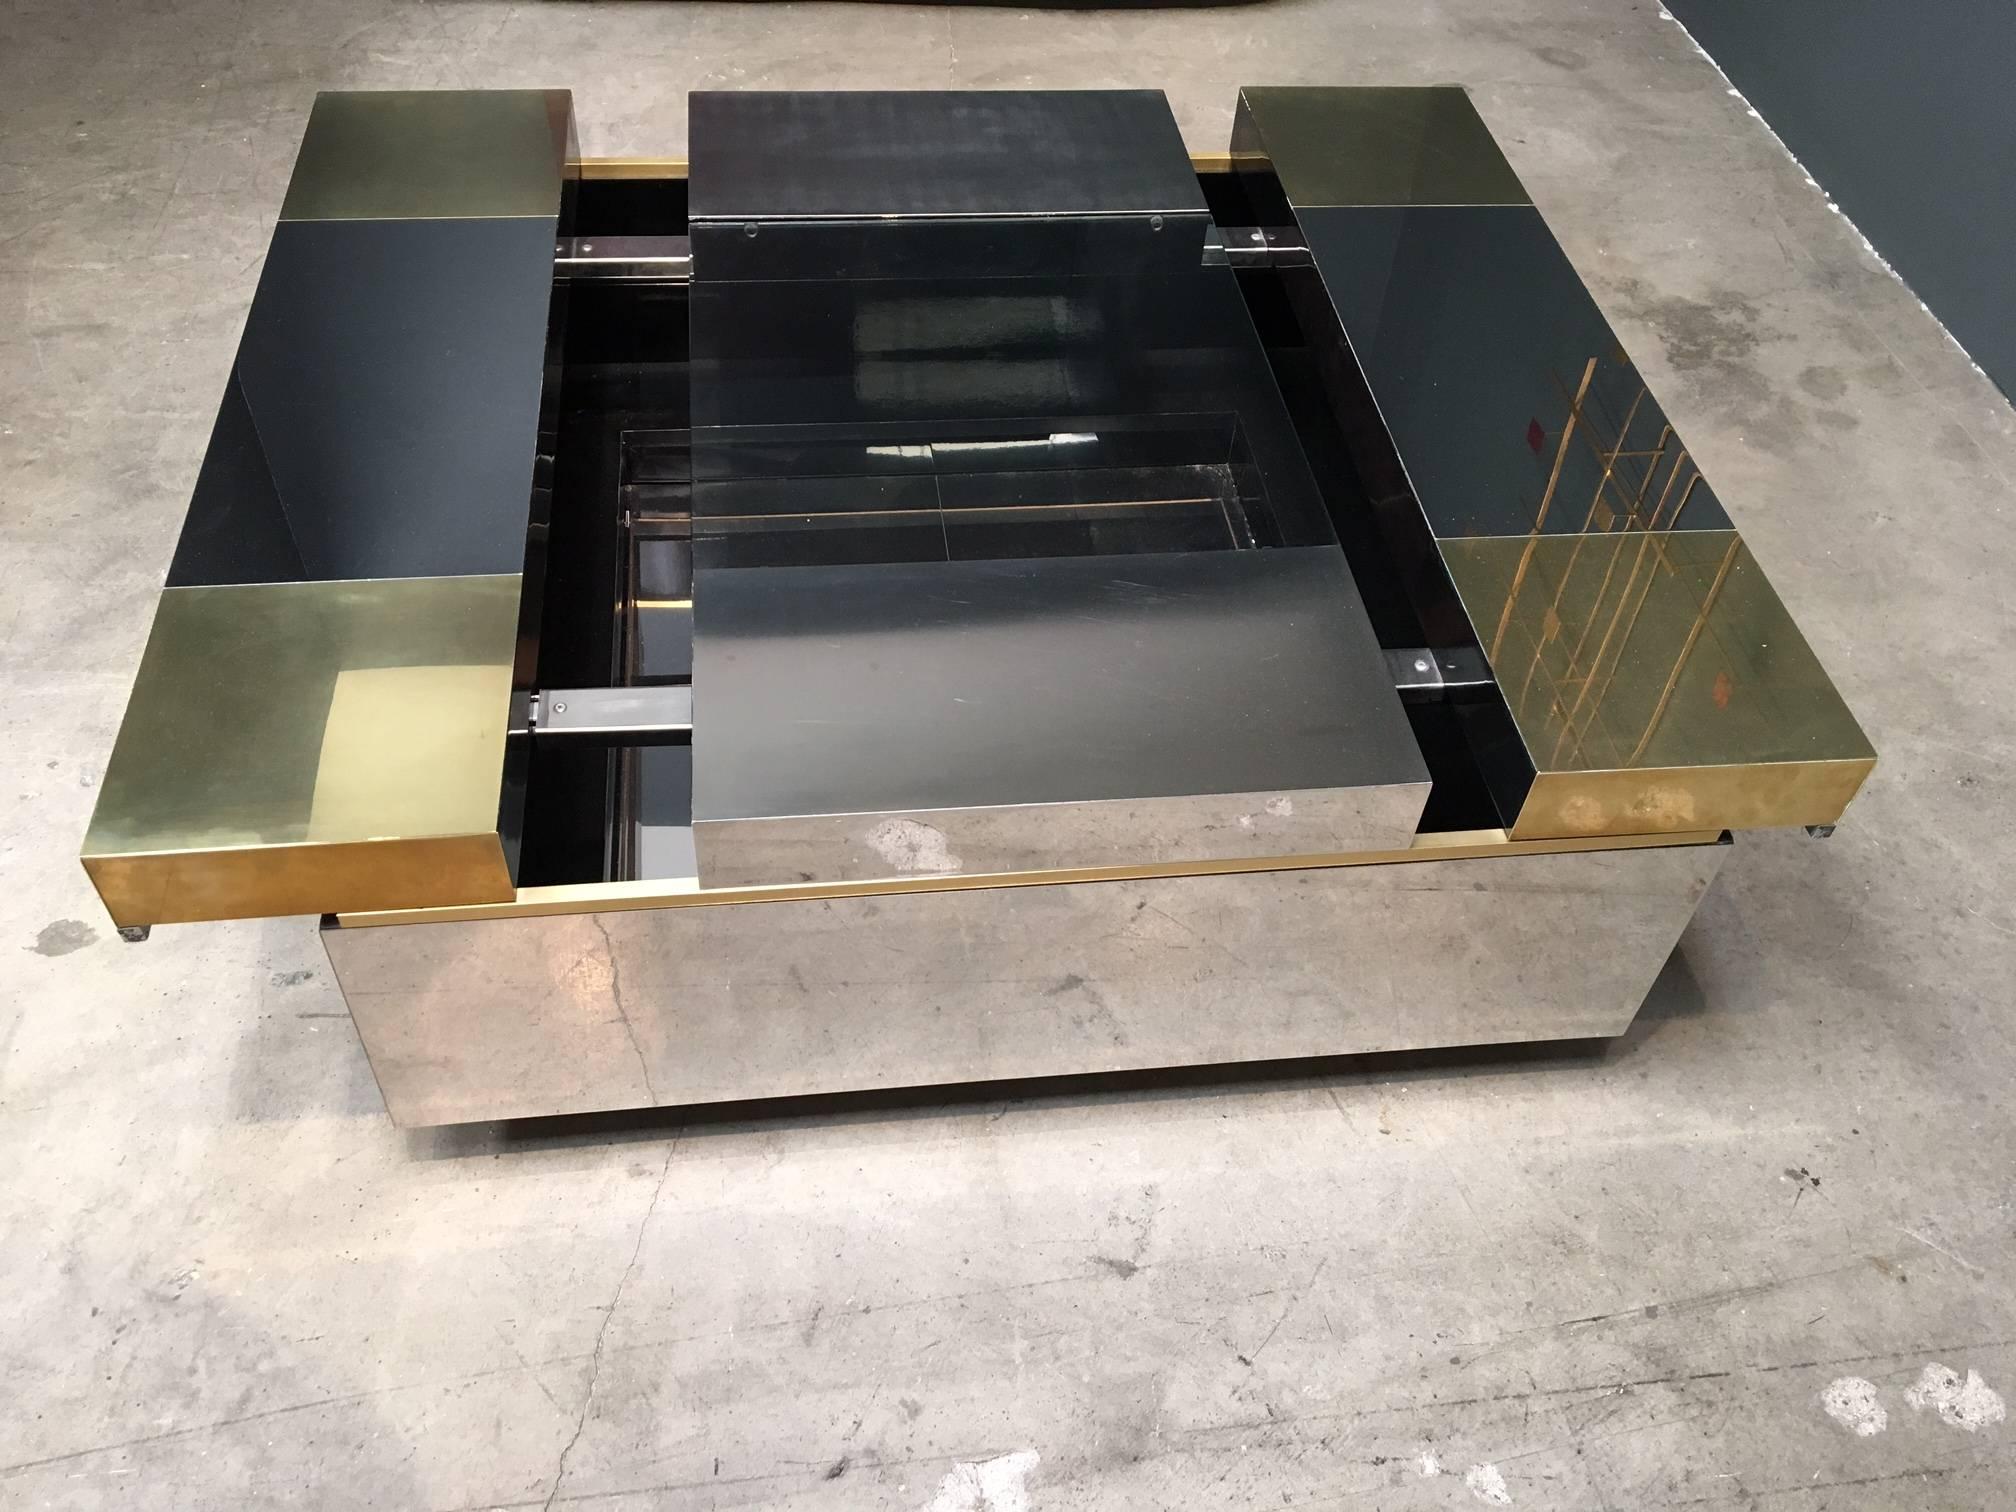 

Italian coffee table
Attributed to Pierre Cardin.
Top slides open for bar or display,

1960-1969.
Brass, stainless steel and glass